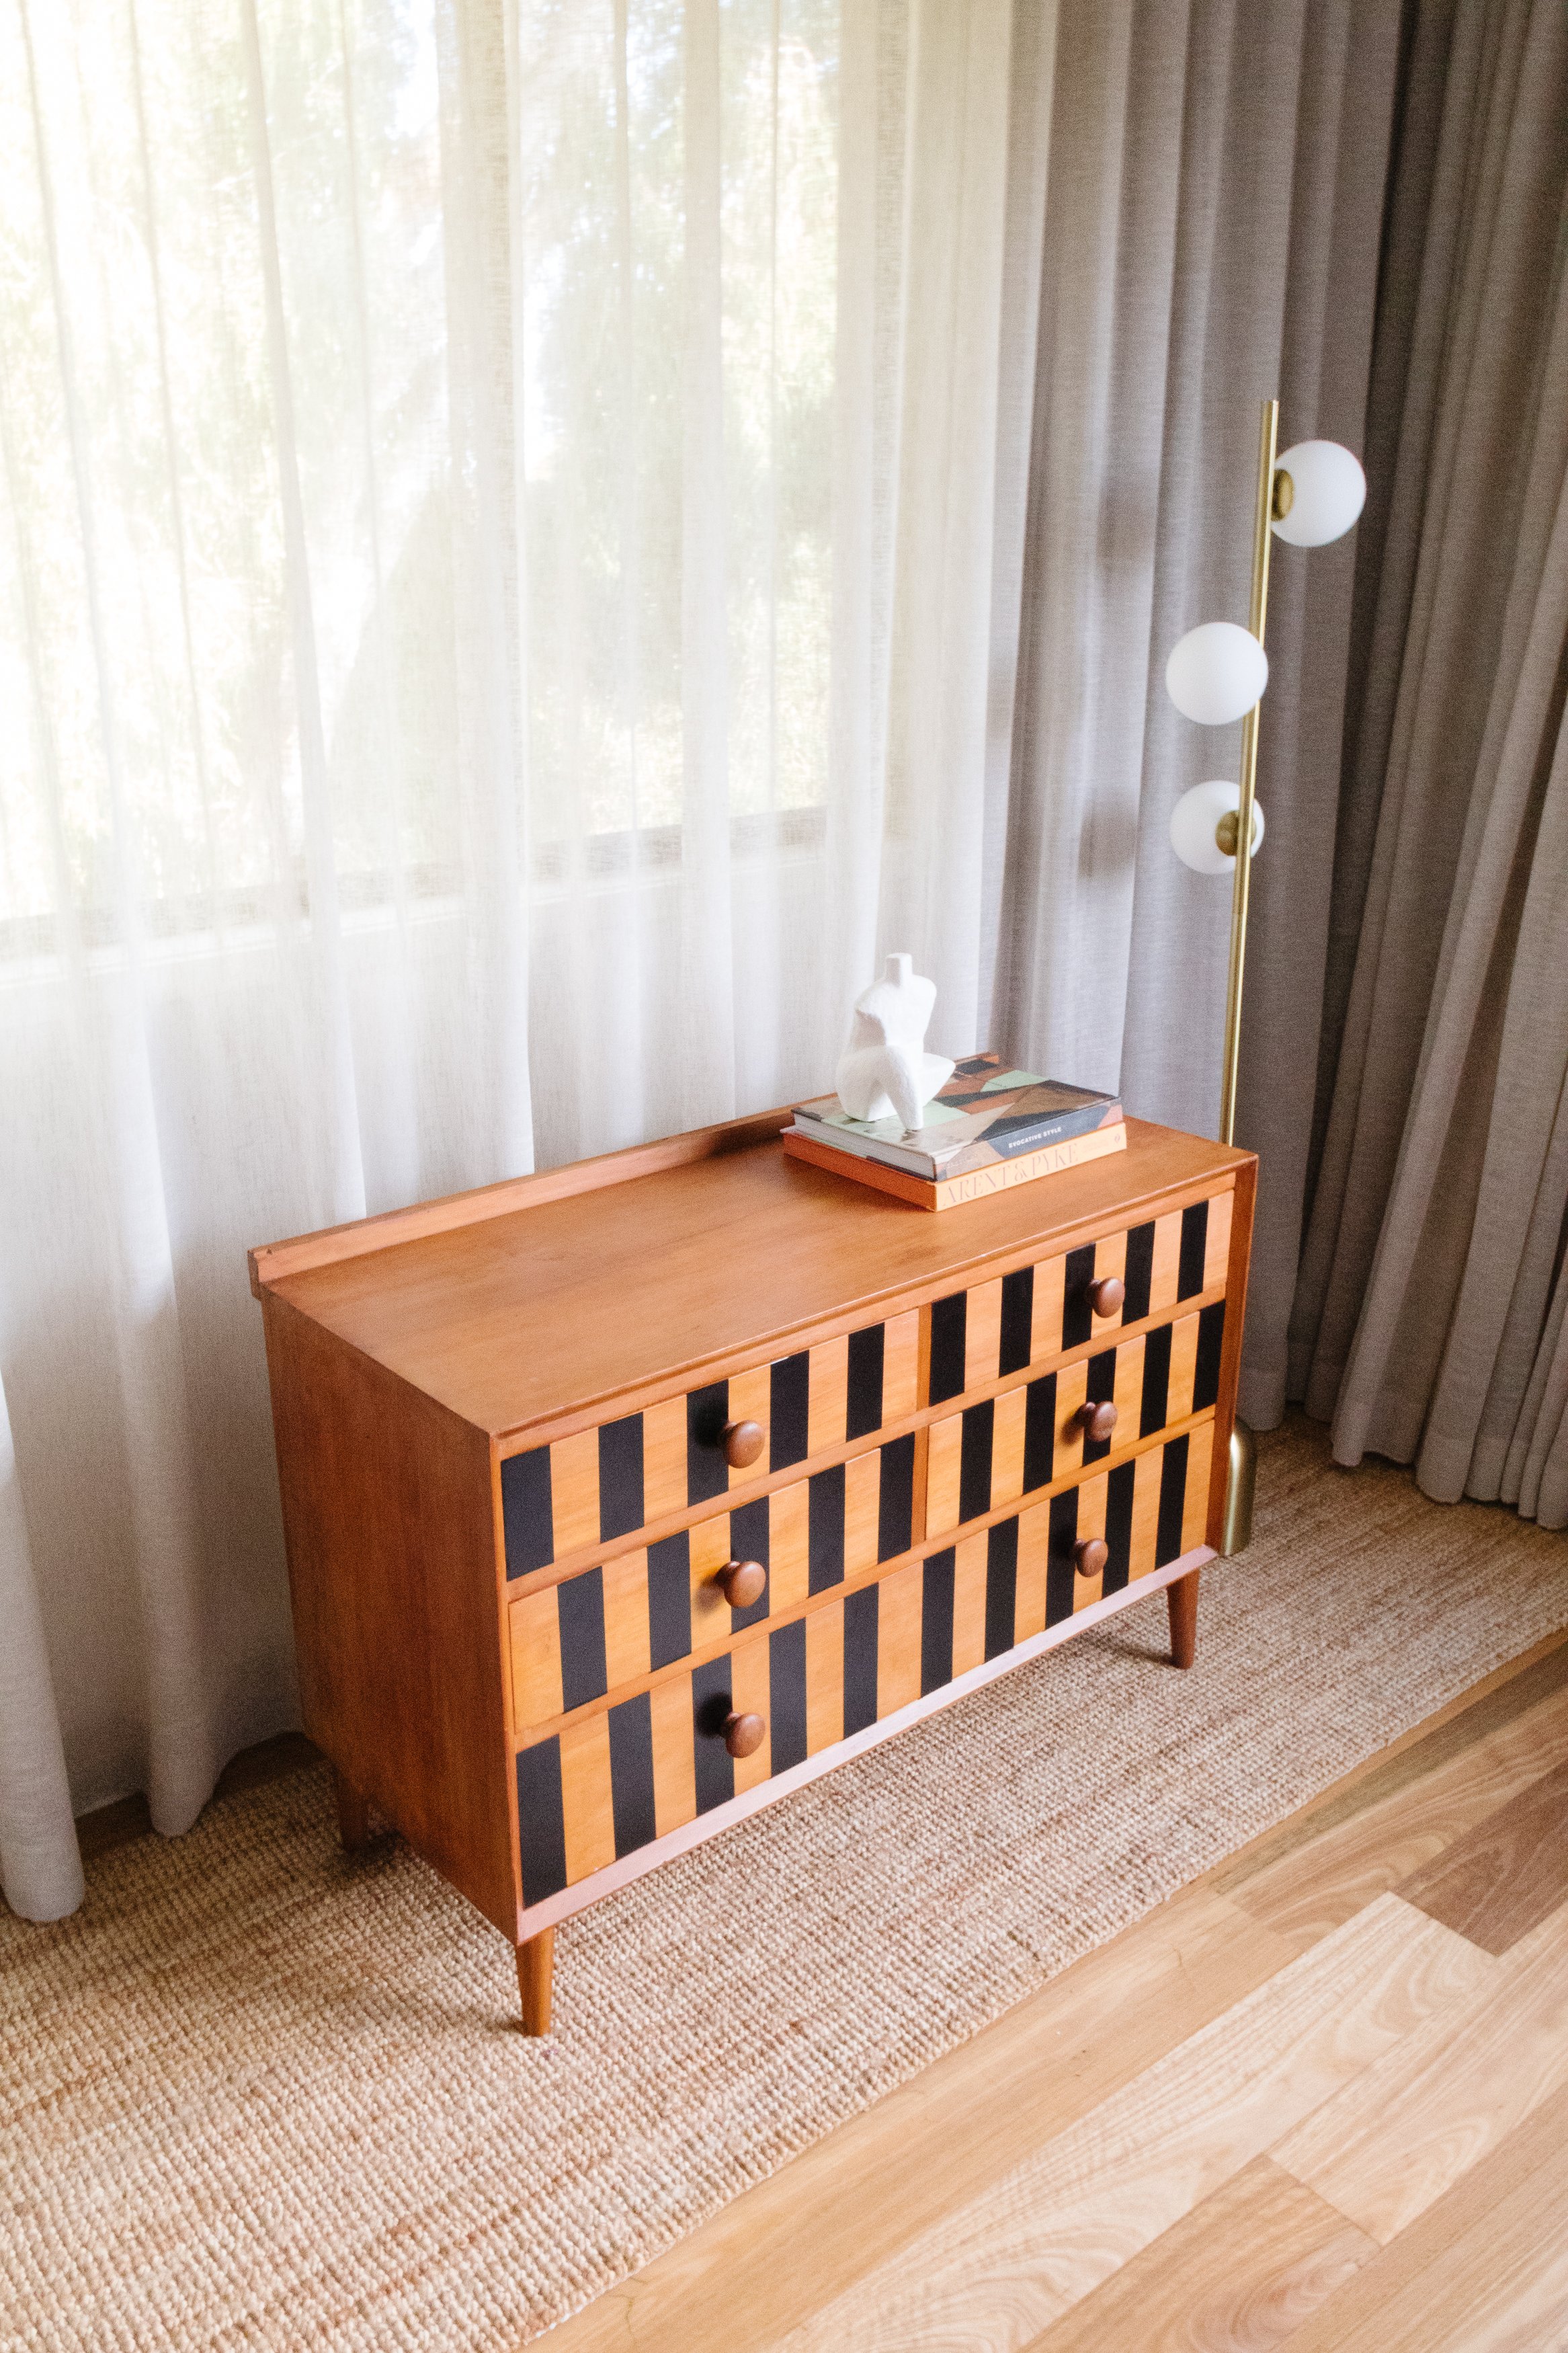 Upcycling A Mid Century Drawers With Cricut__ (11 of 20).jpg